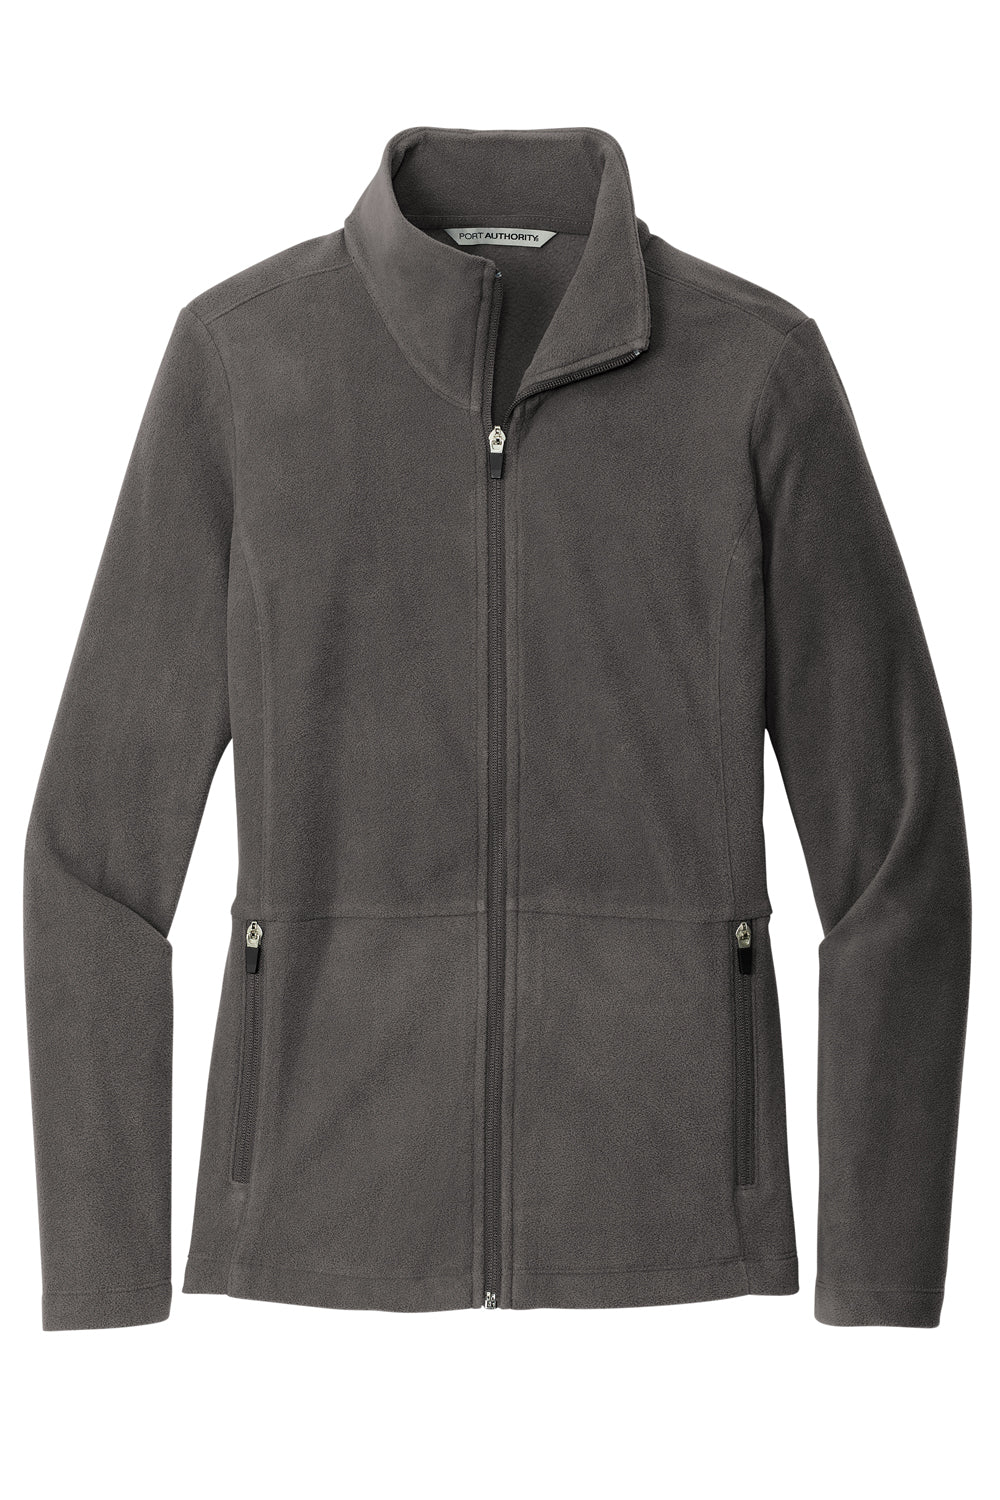 Port Authority L151 Womens Accord Microfleece Full Zip Jacket Pewter Grey Flat Front